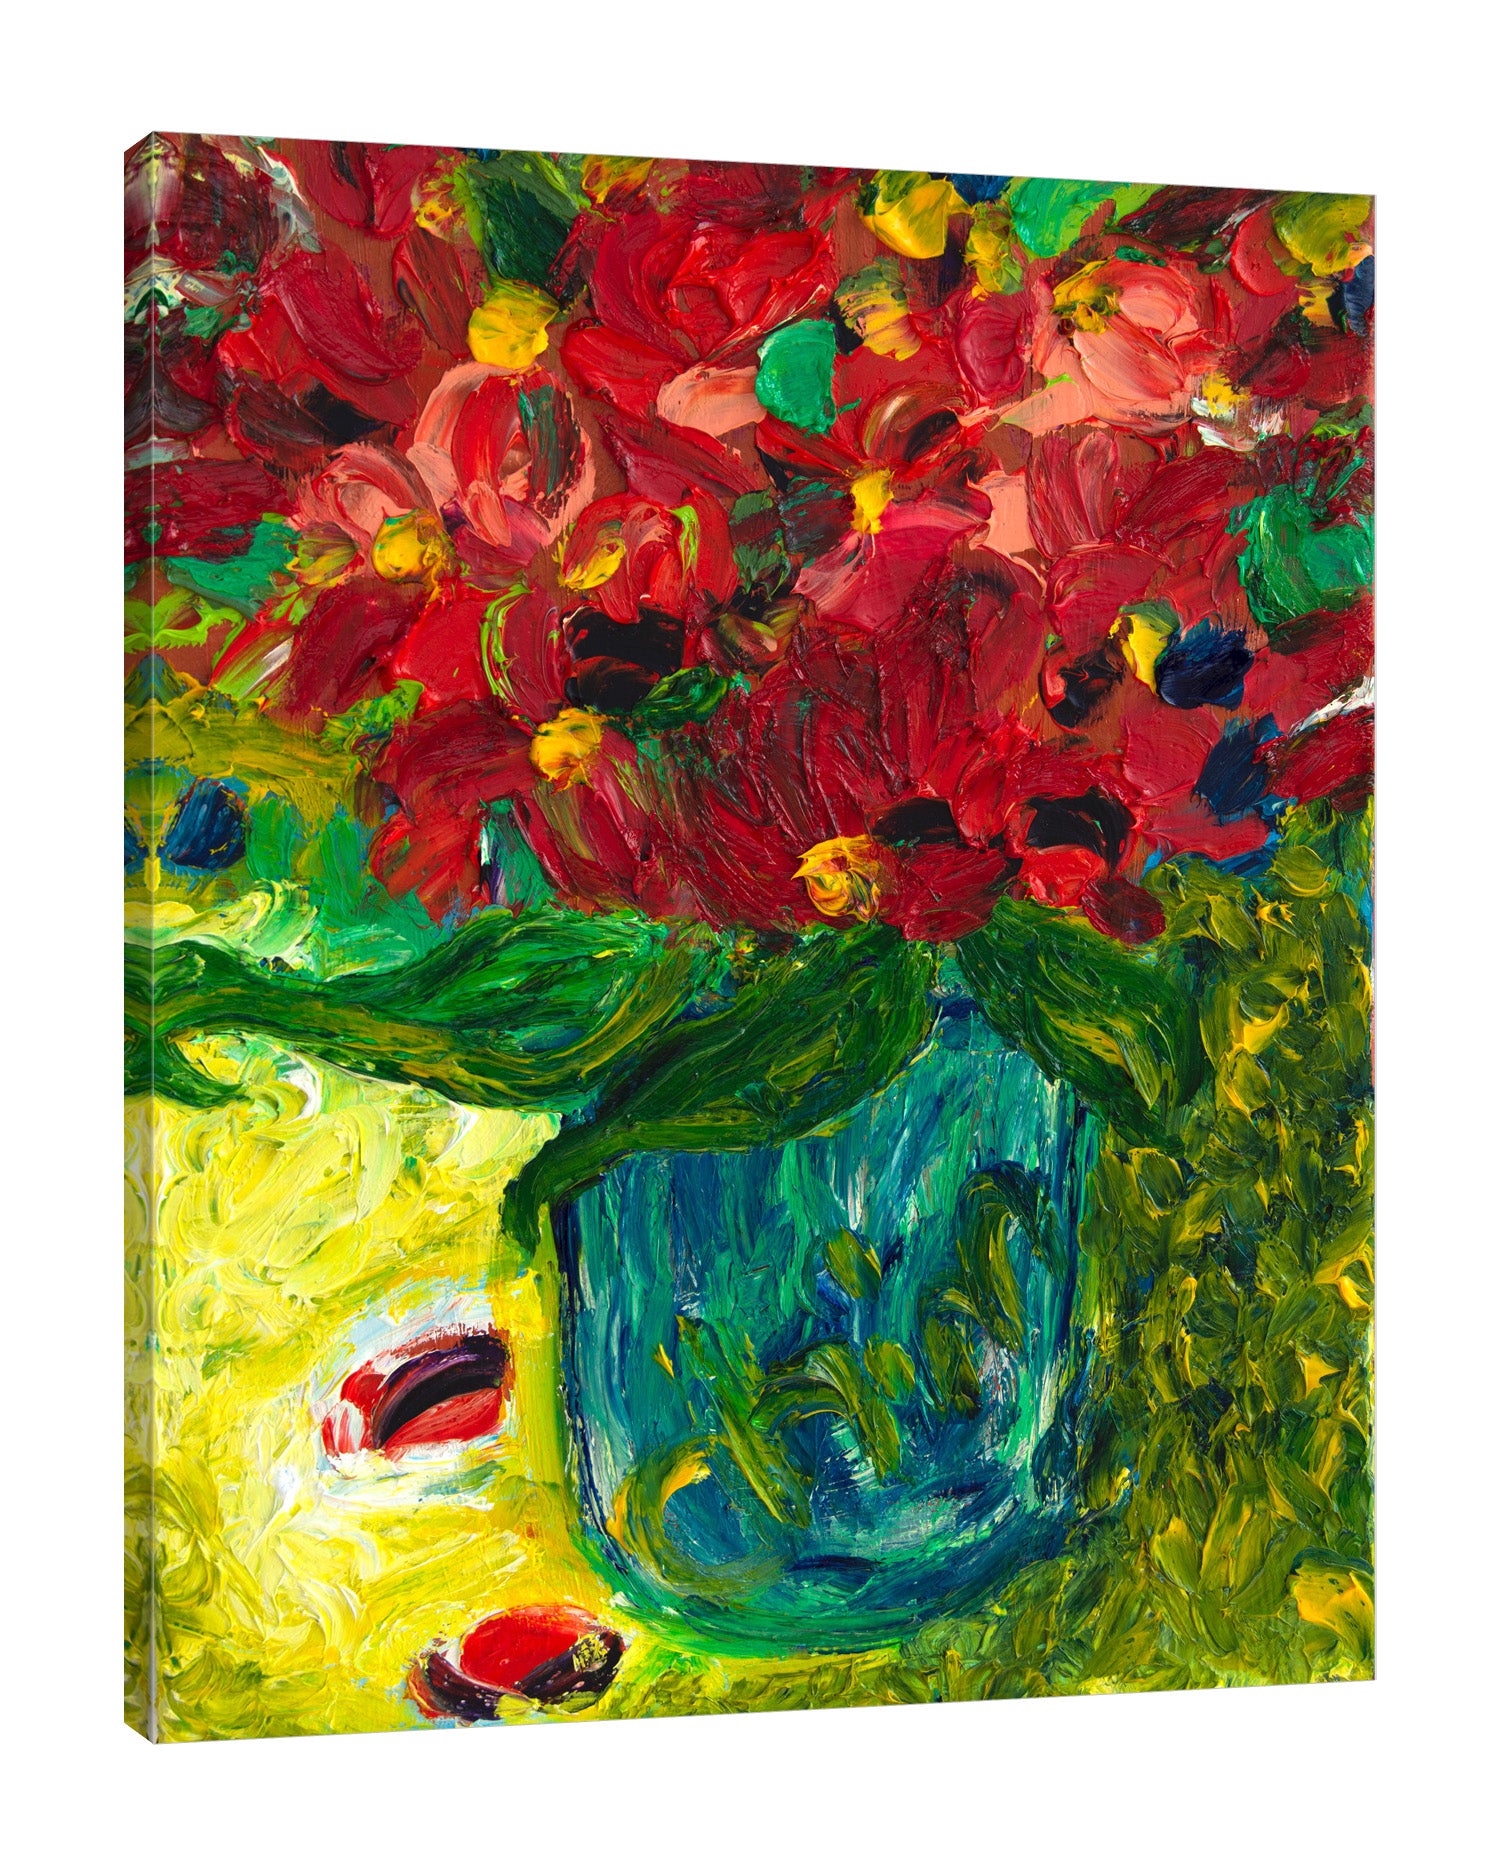 Chiara-Magni,Modern & Contemporary,Floral & Botanical,Finger-paint,florals,floral,flowers,flower,petals,leaves,yellow,bouquets,vases,petals,green,red,